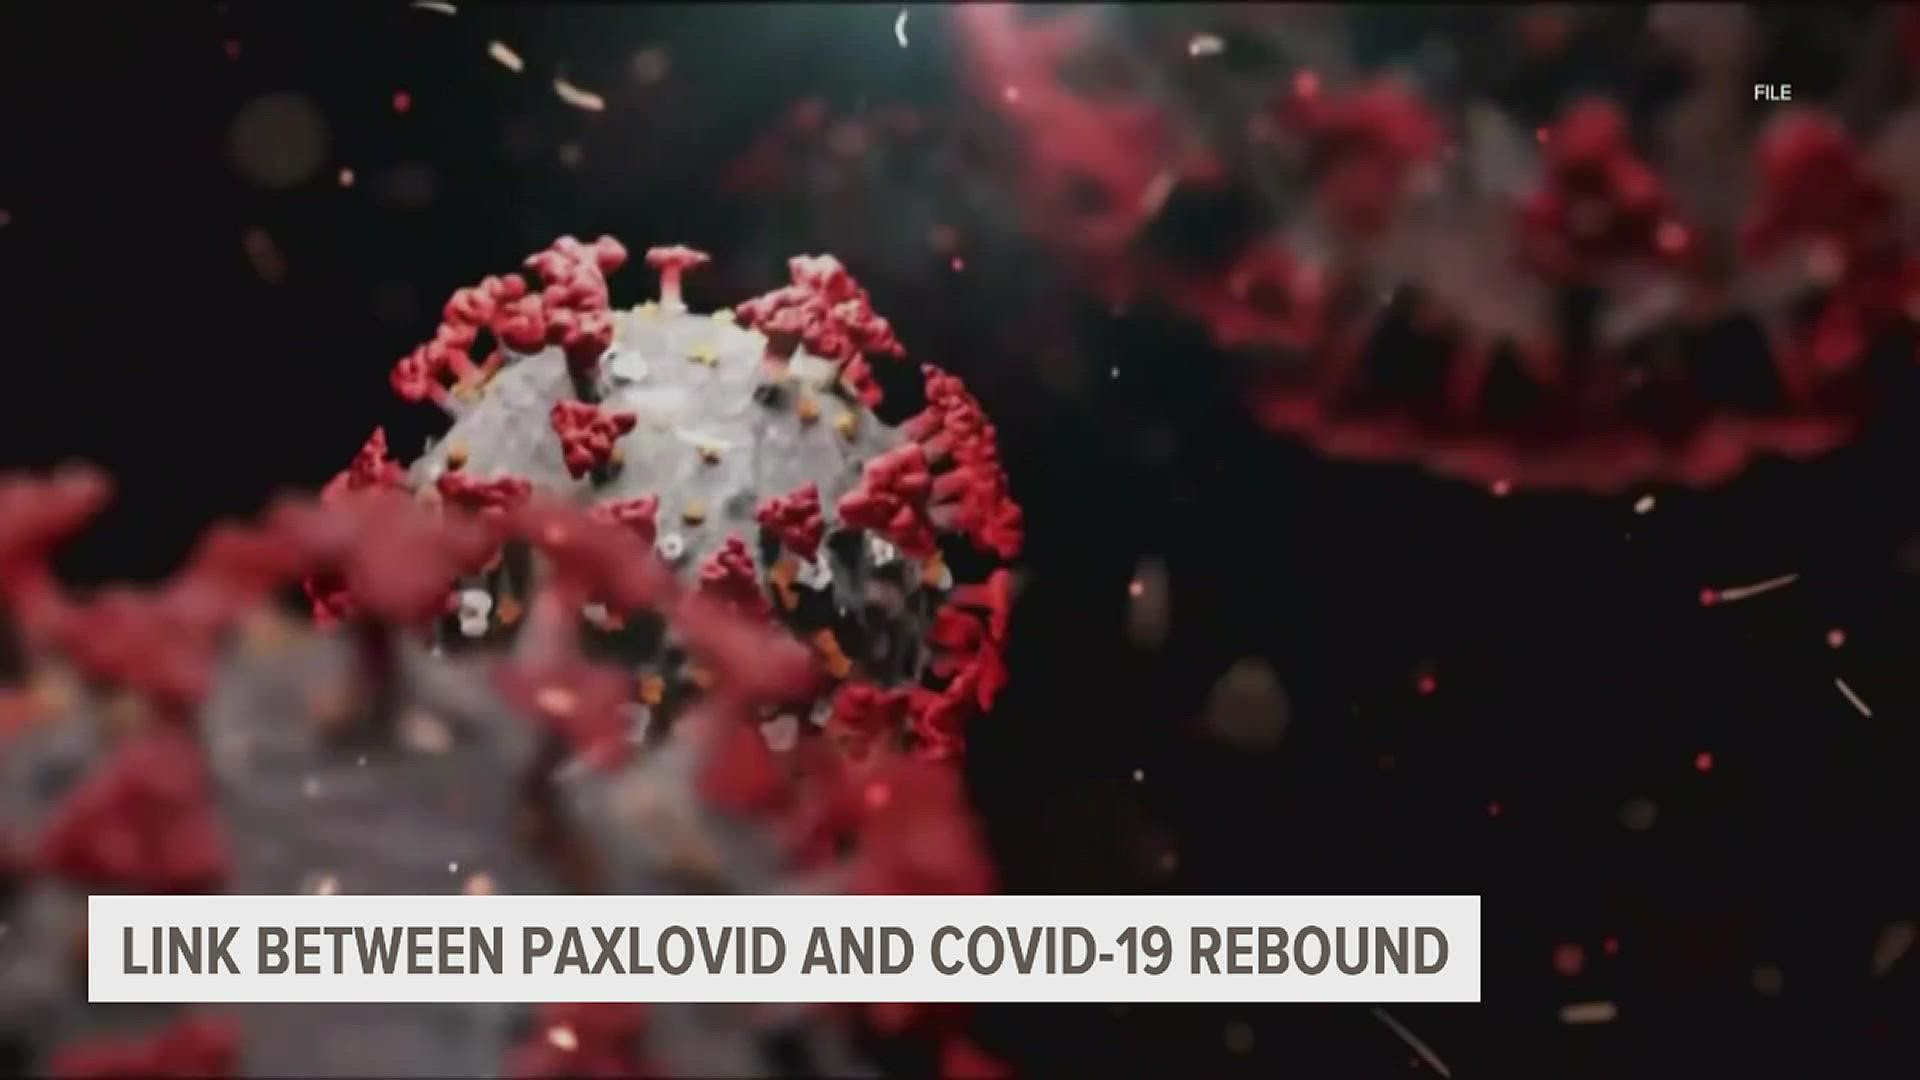 More cases of "COVID-19 rebound' are being reported, which is typically seen after treatment with Paxlovid.